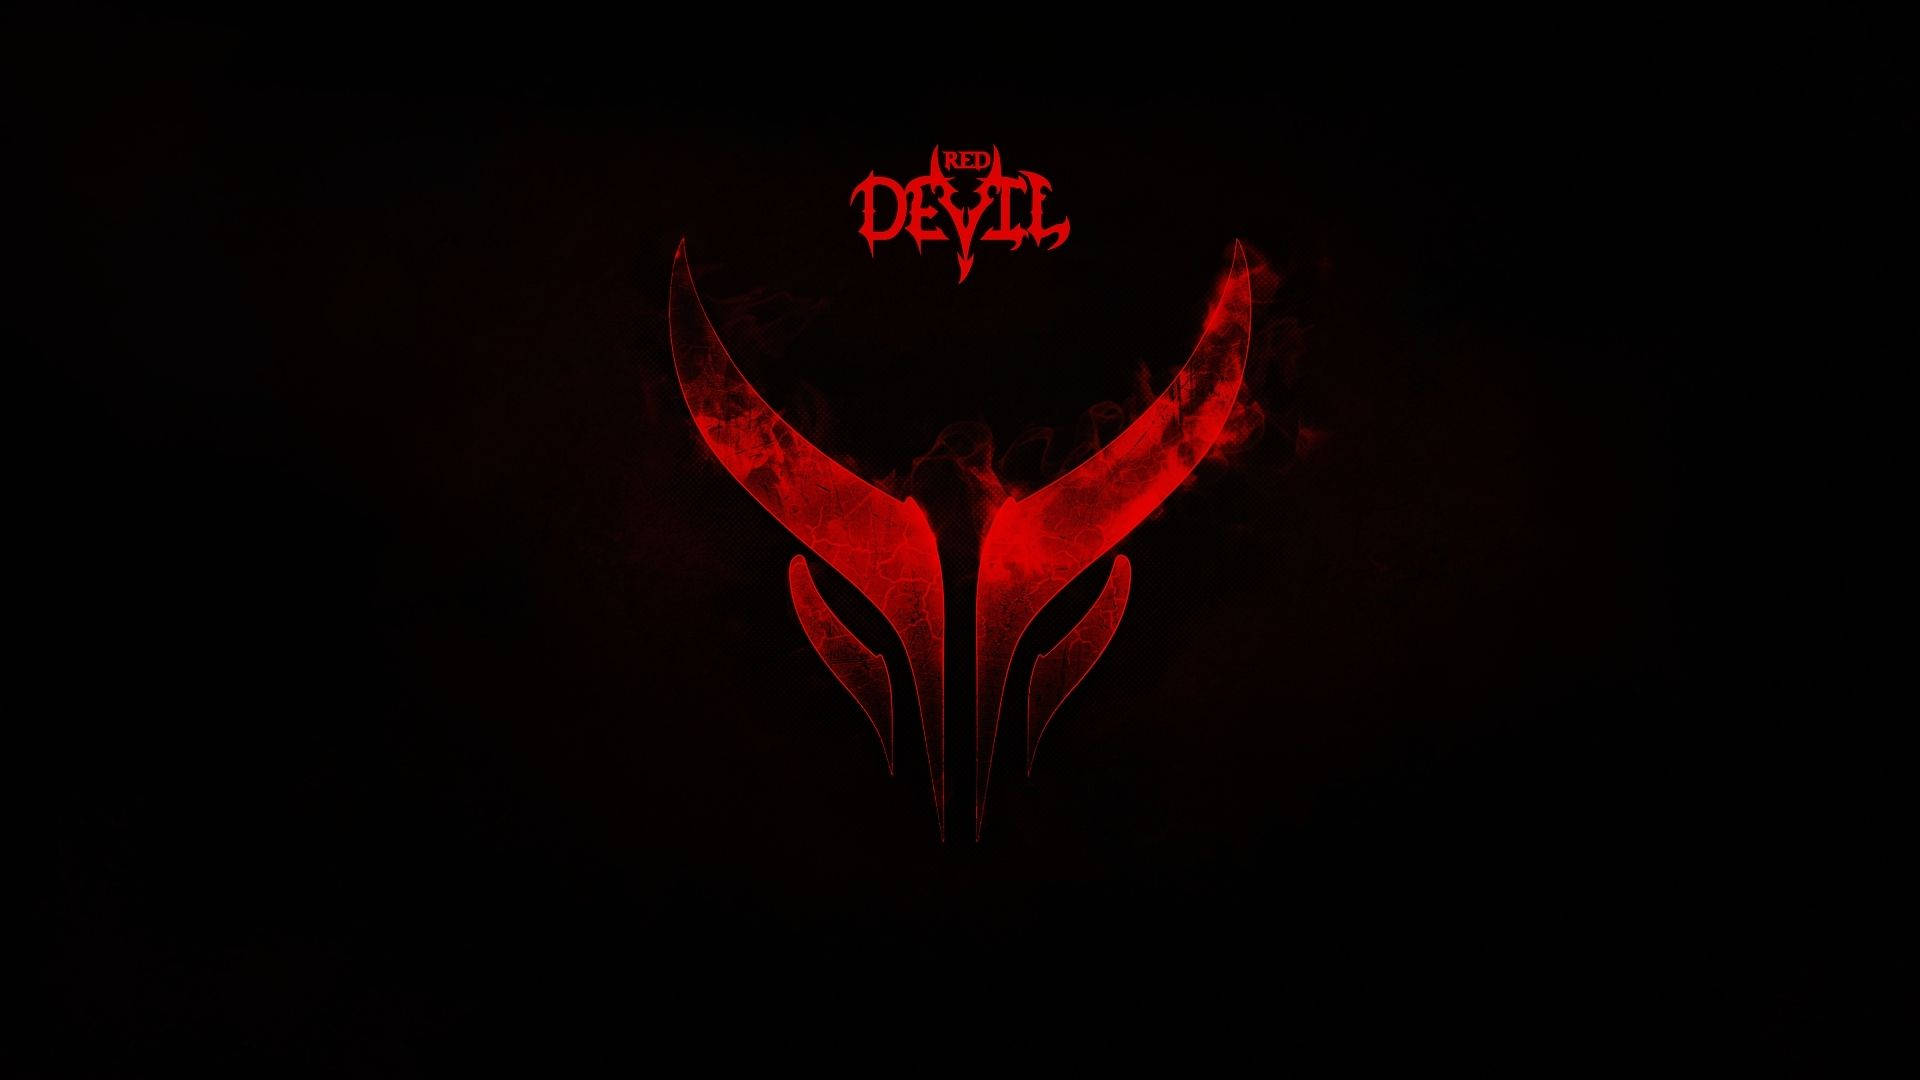 Red Devil Silhouette Background